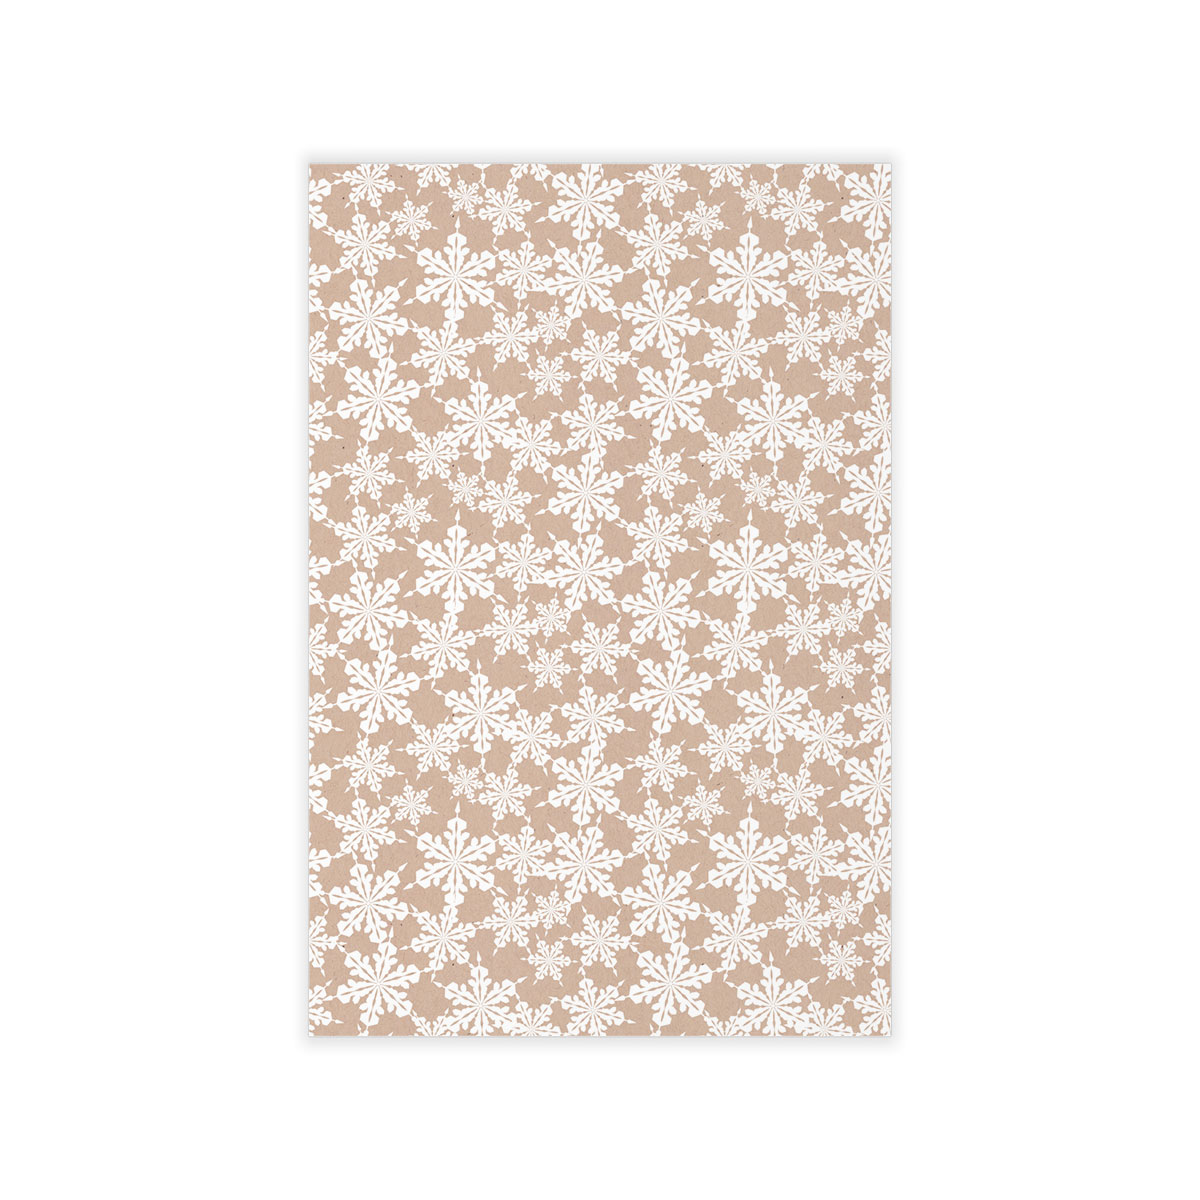 Christmas White Snowflake Christmas On Beige Nude Background Wall Decals